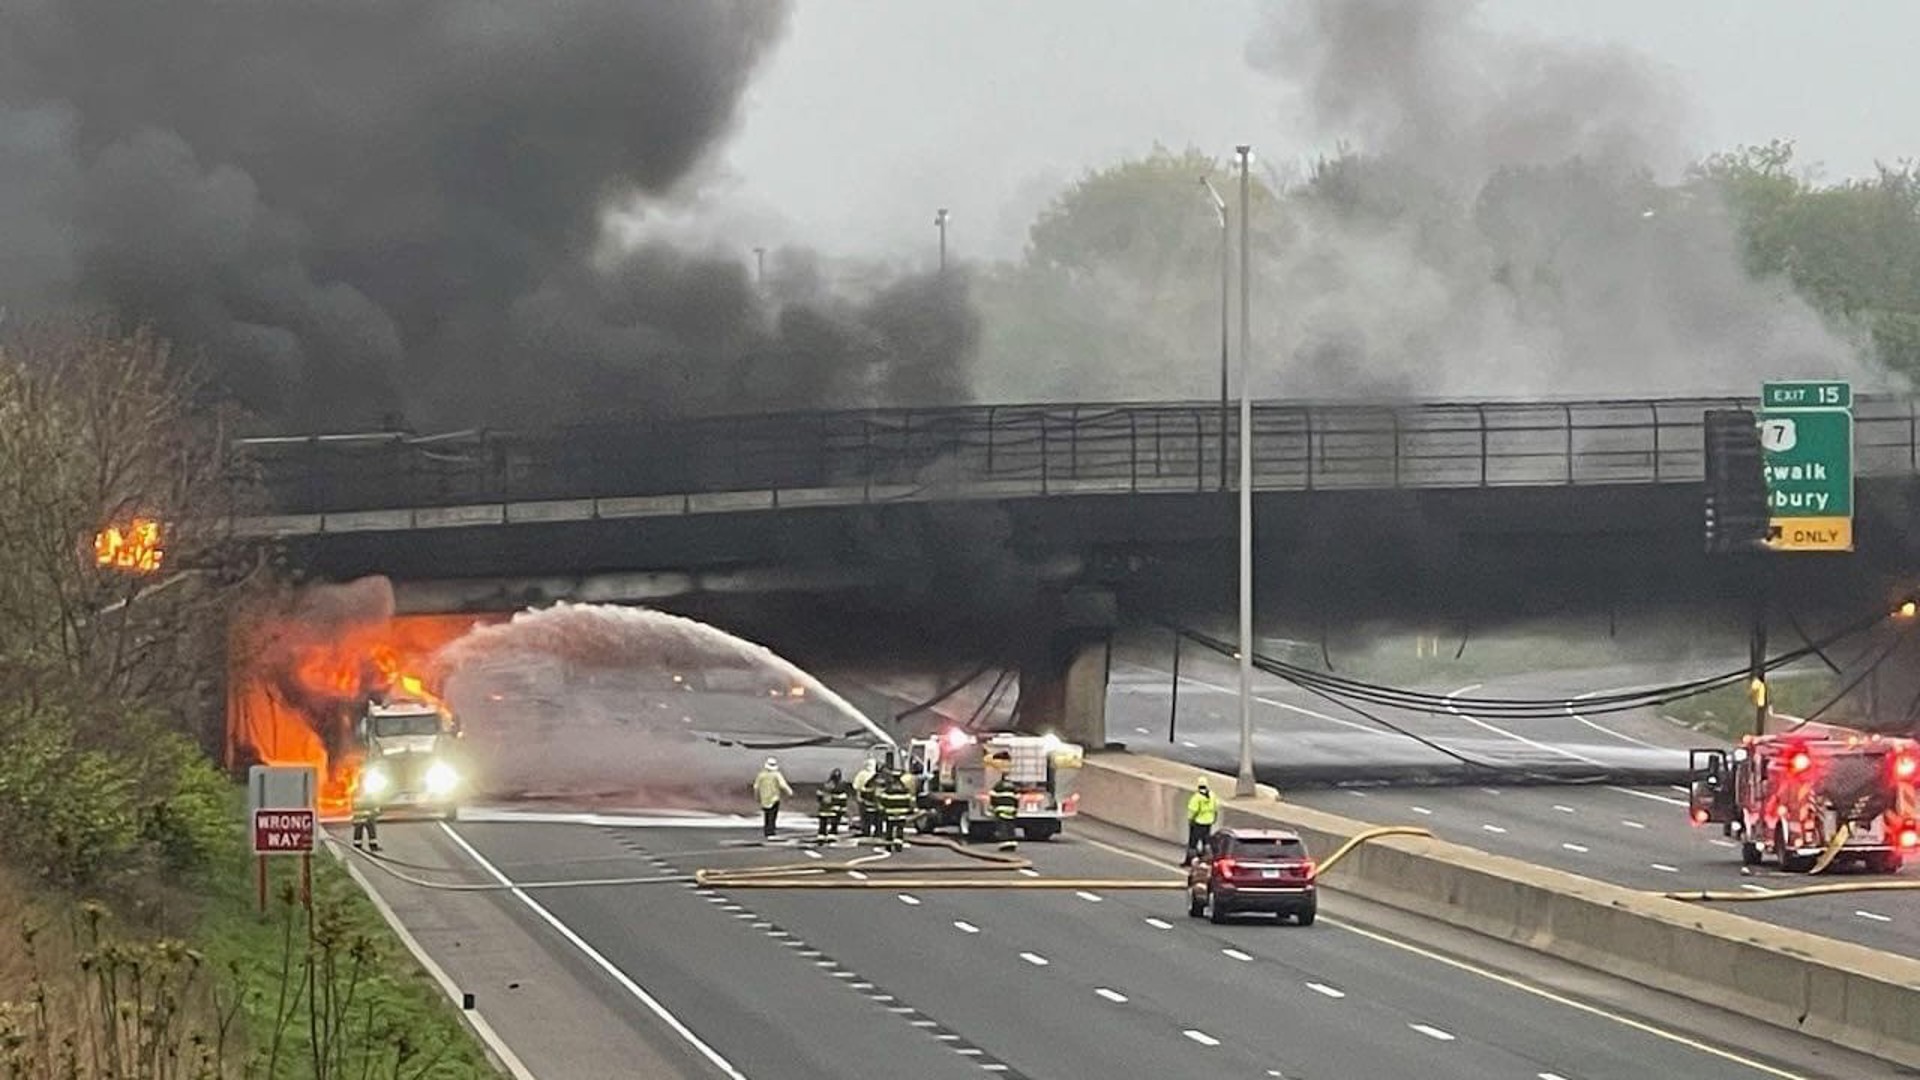 Part of I-95 will be shut down, likely for days, after fiery crash that damaged an overpass.